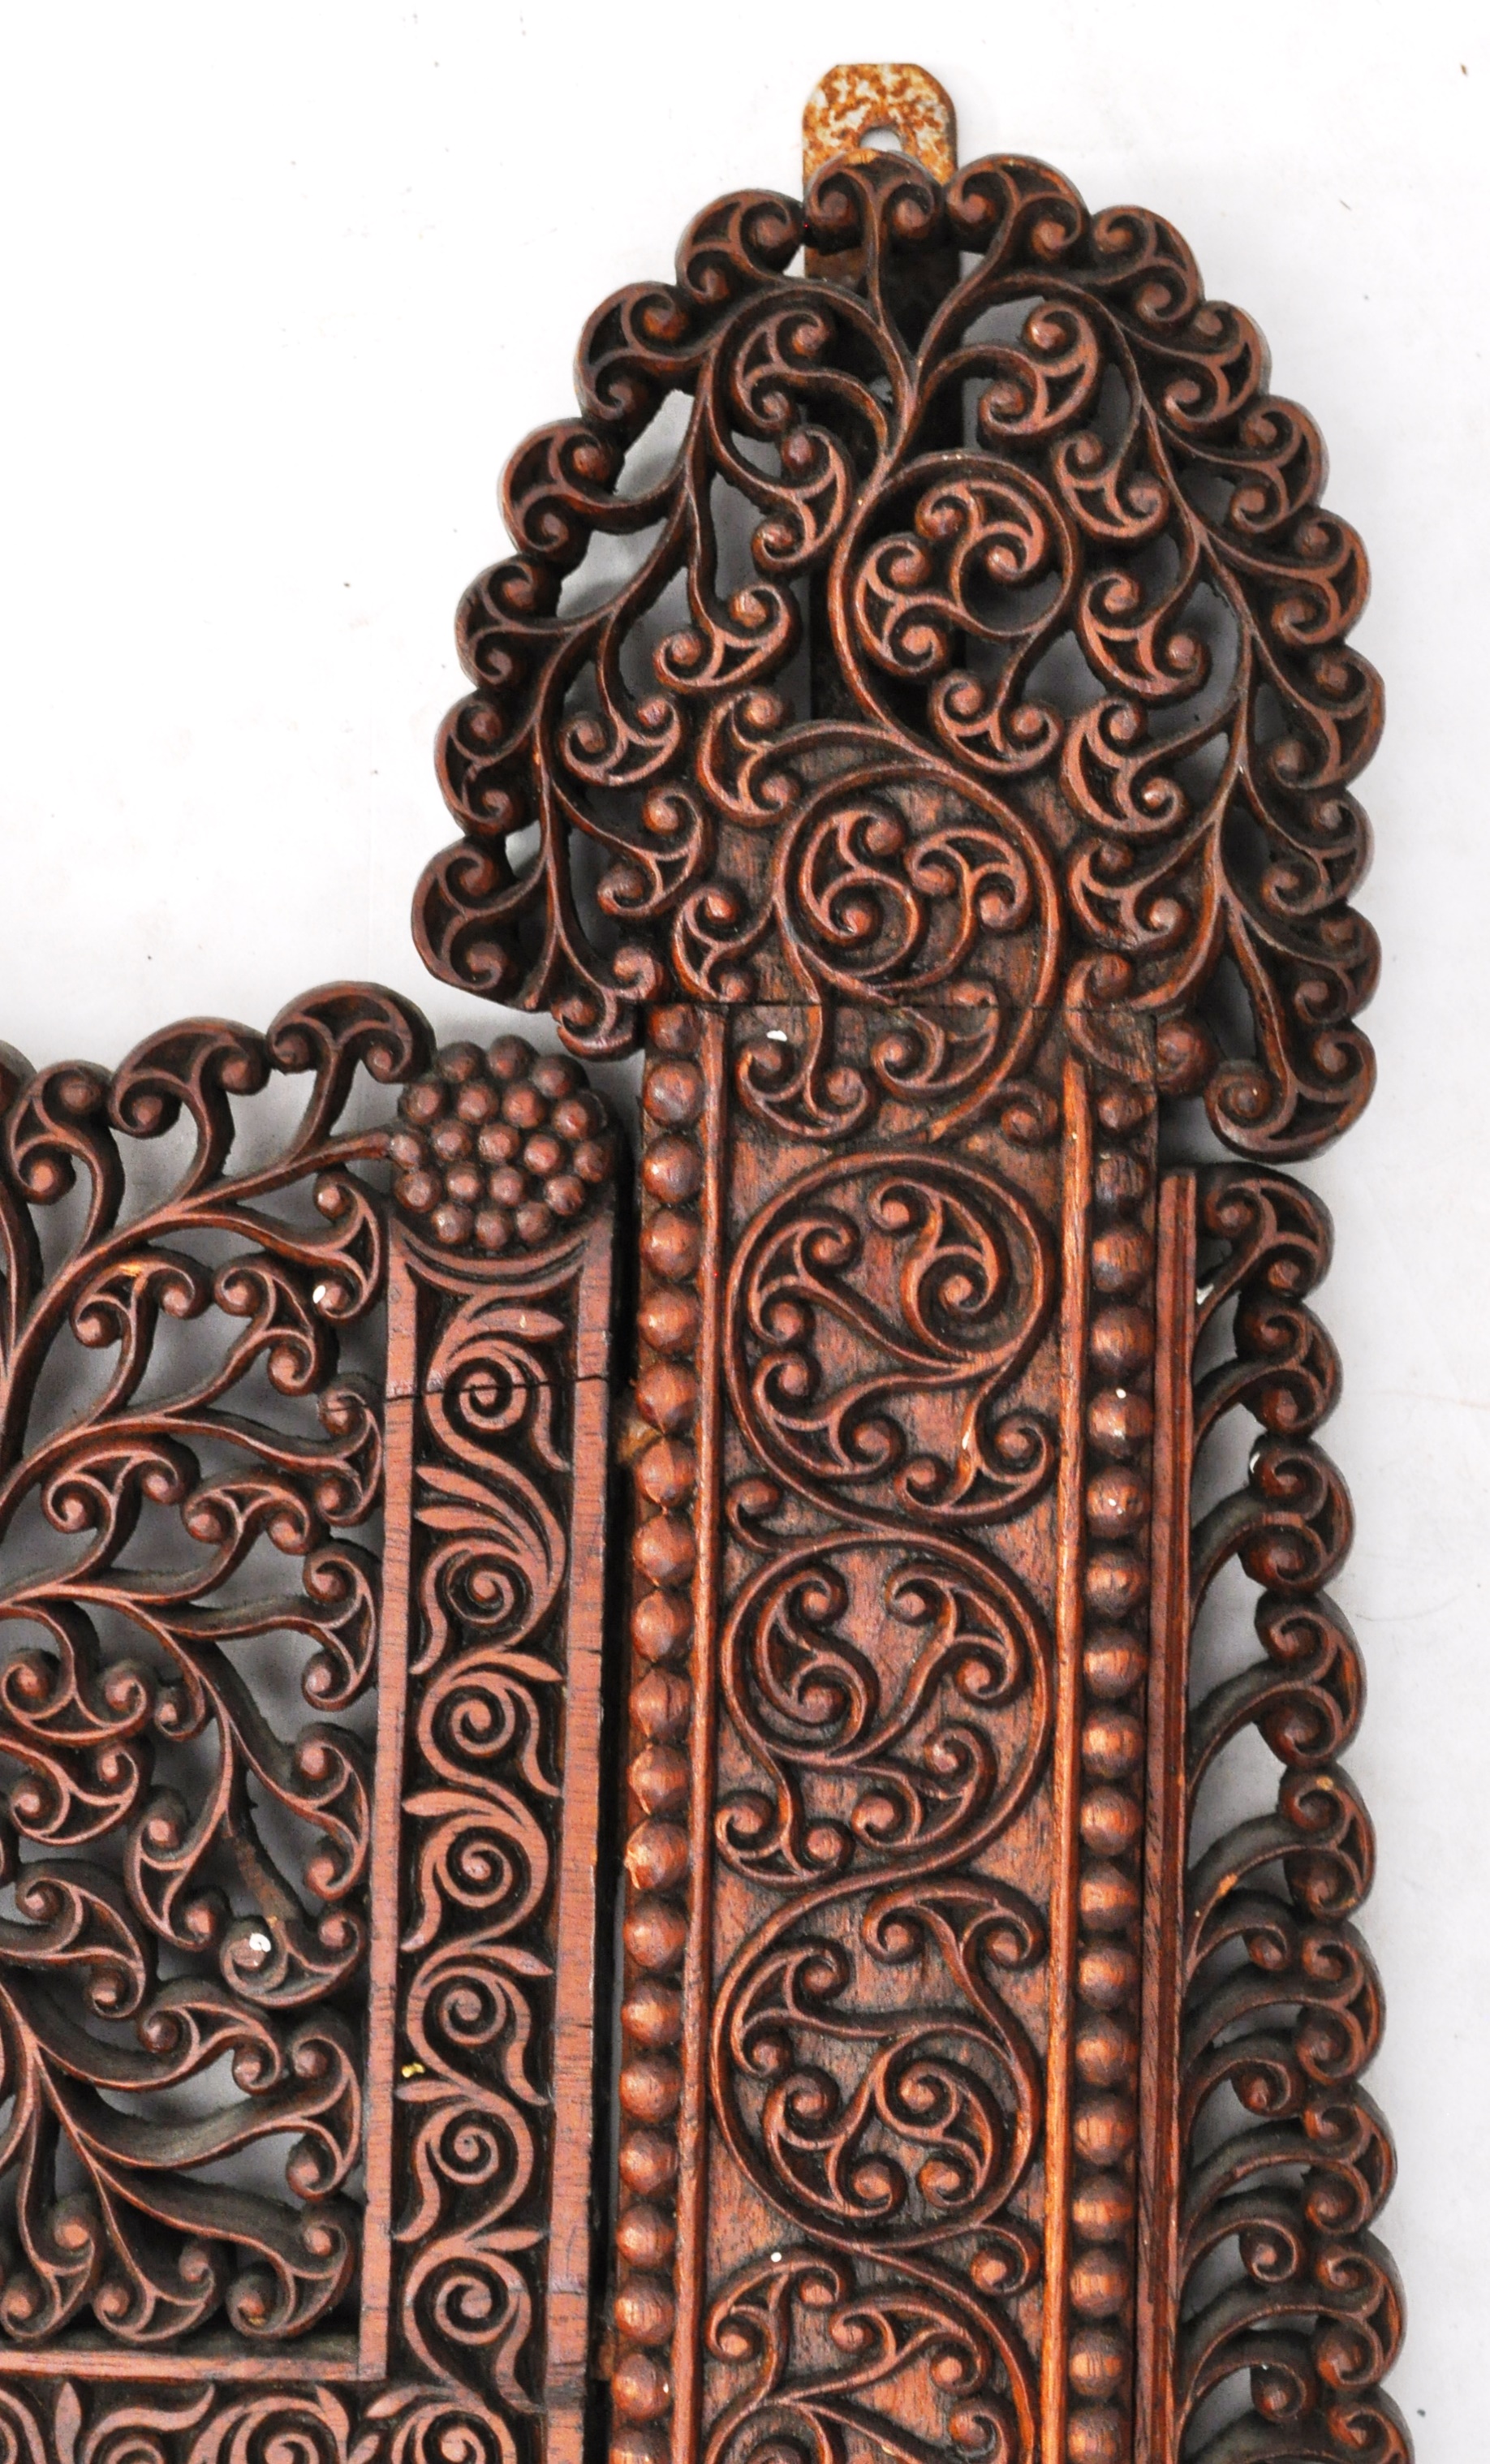 ANTIQUE 19TH CENTURY INDIAN CARVED WOOD ORNATE OVERMANTLE MIRROR - Image 5 of 7